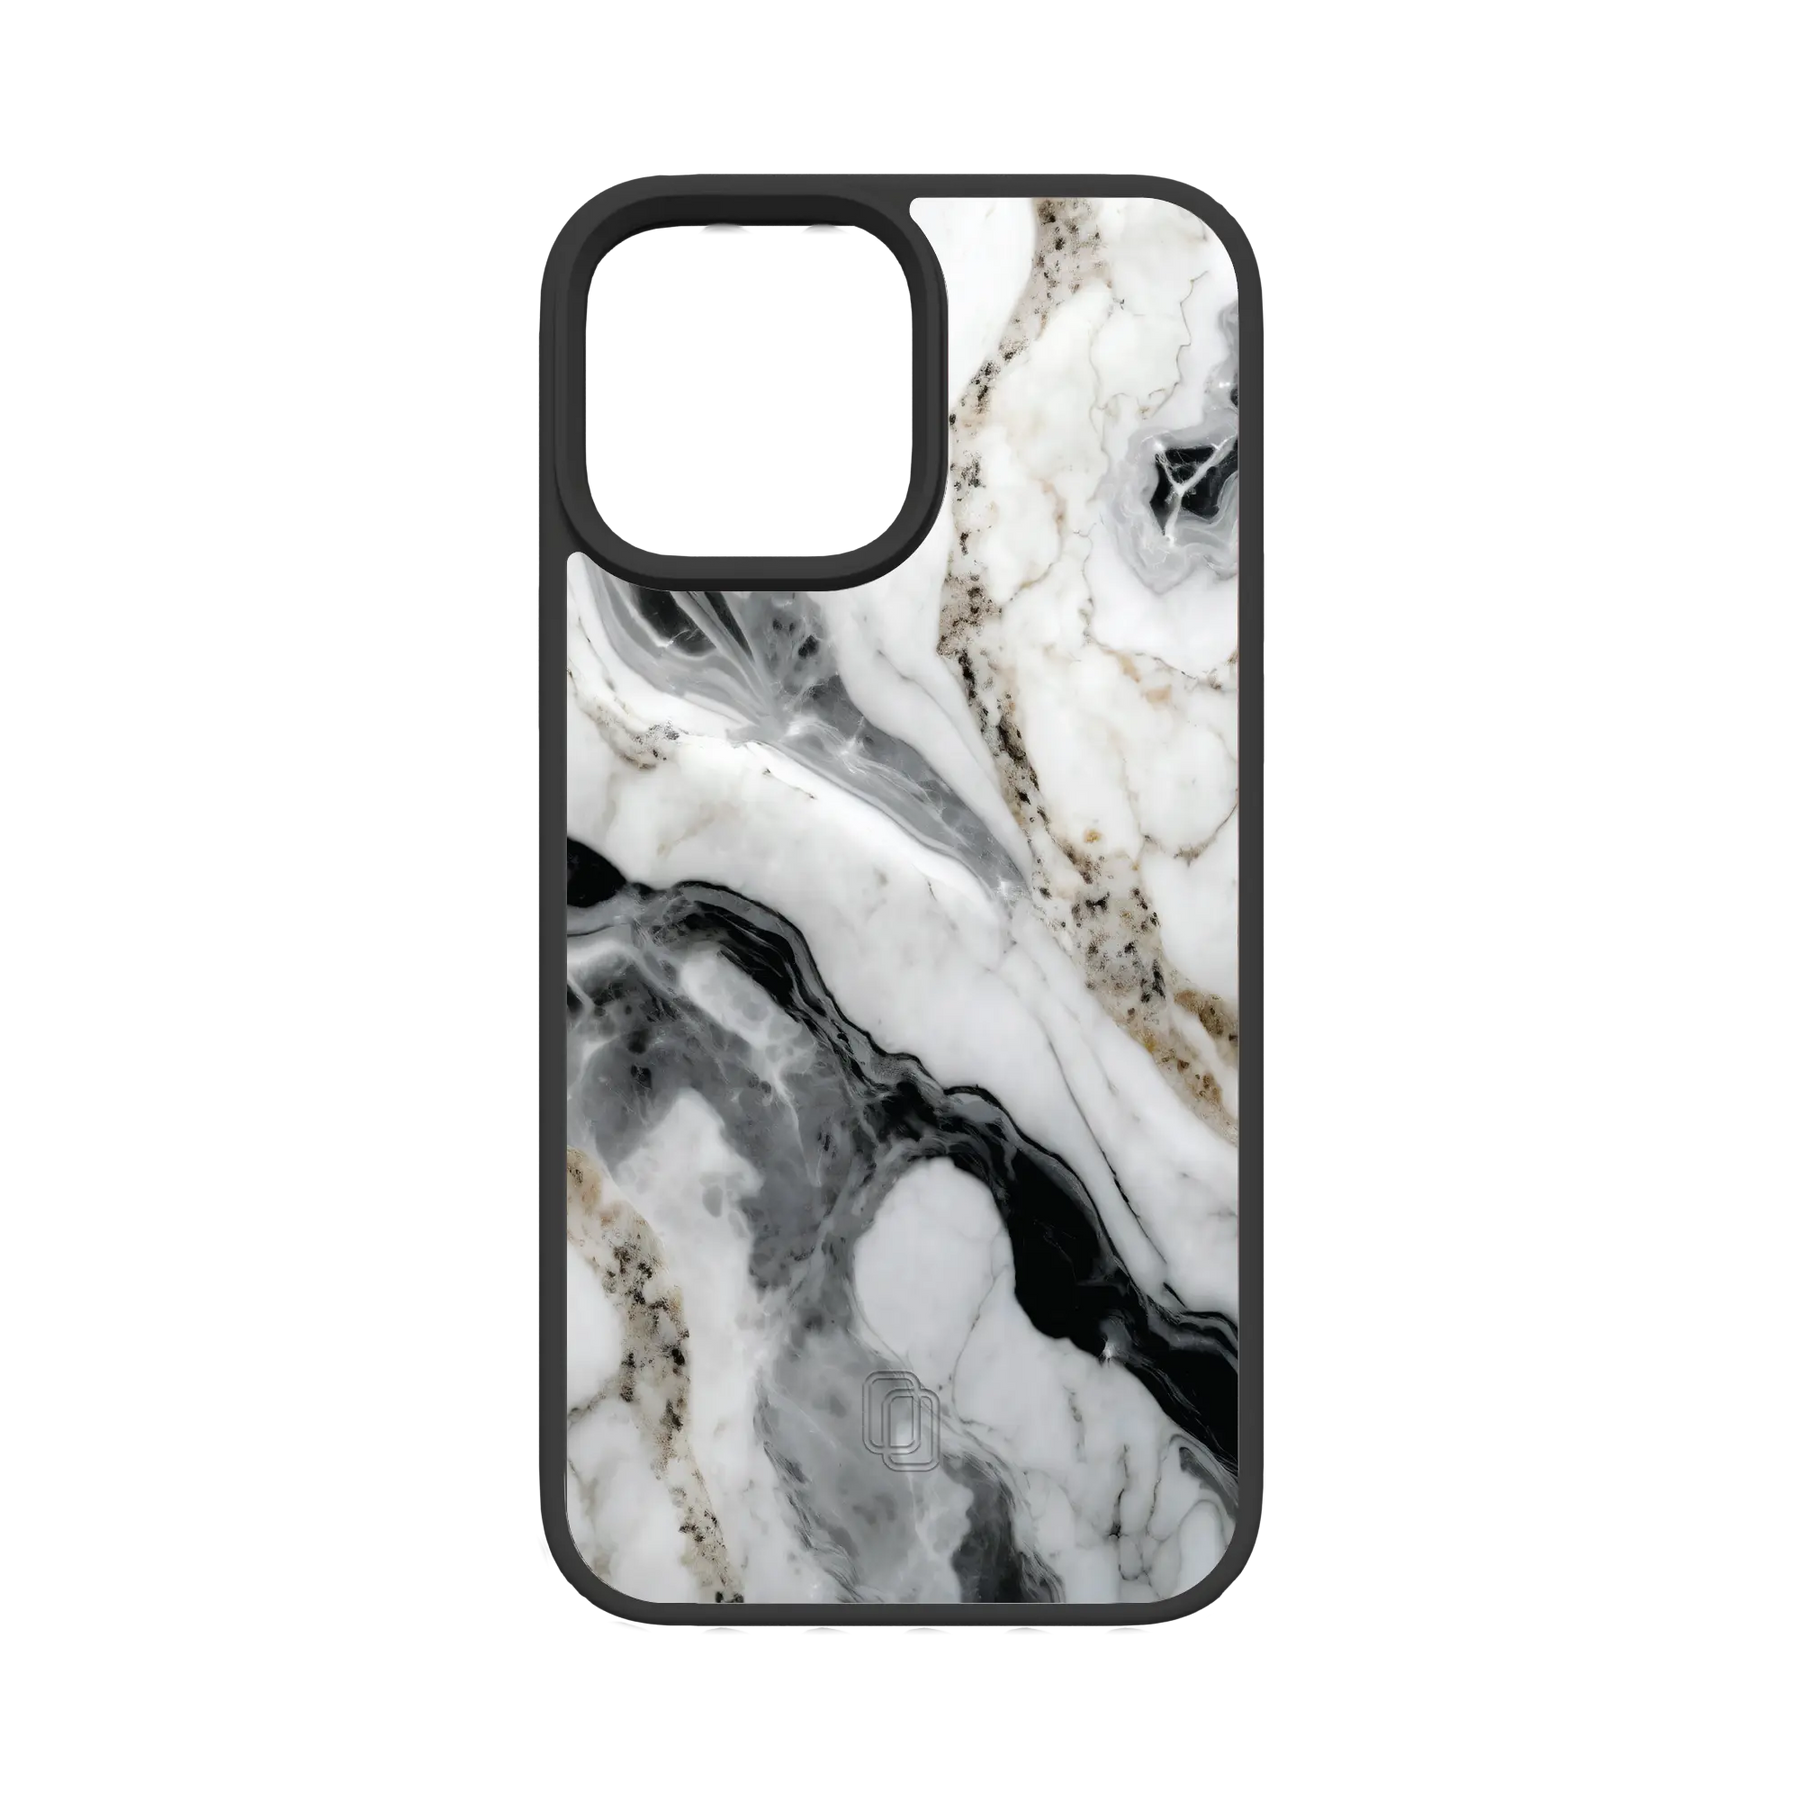 Apple-iPhone-12-12-Pro-Crystal-Clear Pure Snow | Protective MagSafe Case | Marble Stone Collection for Apple iPhone 12 Series cellhelmet cellhelmet